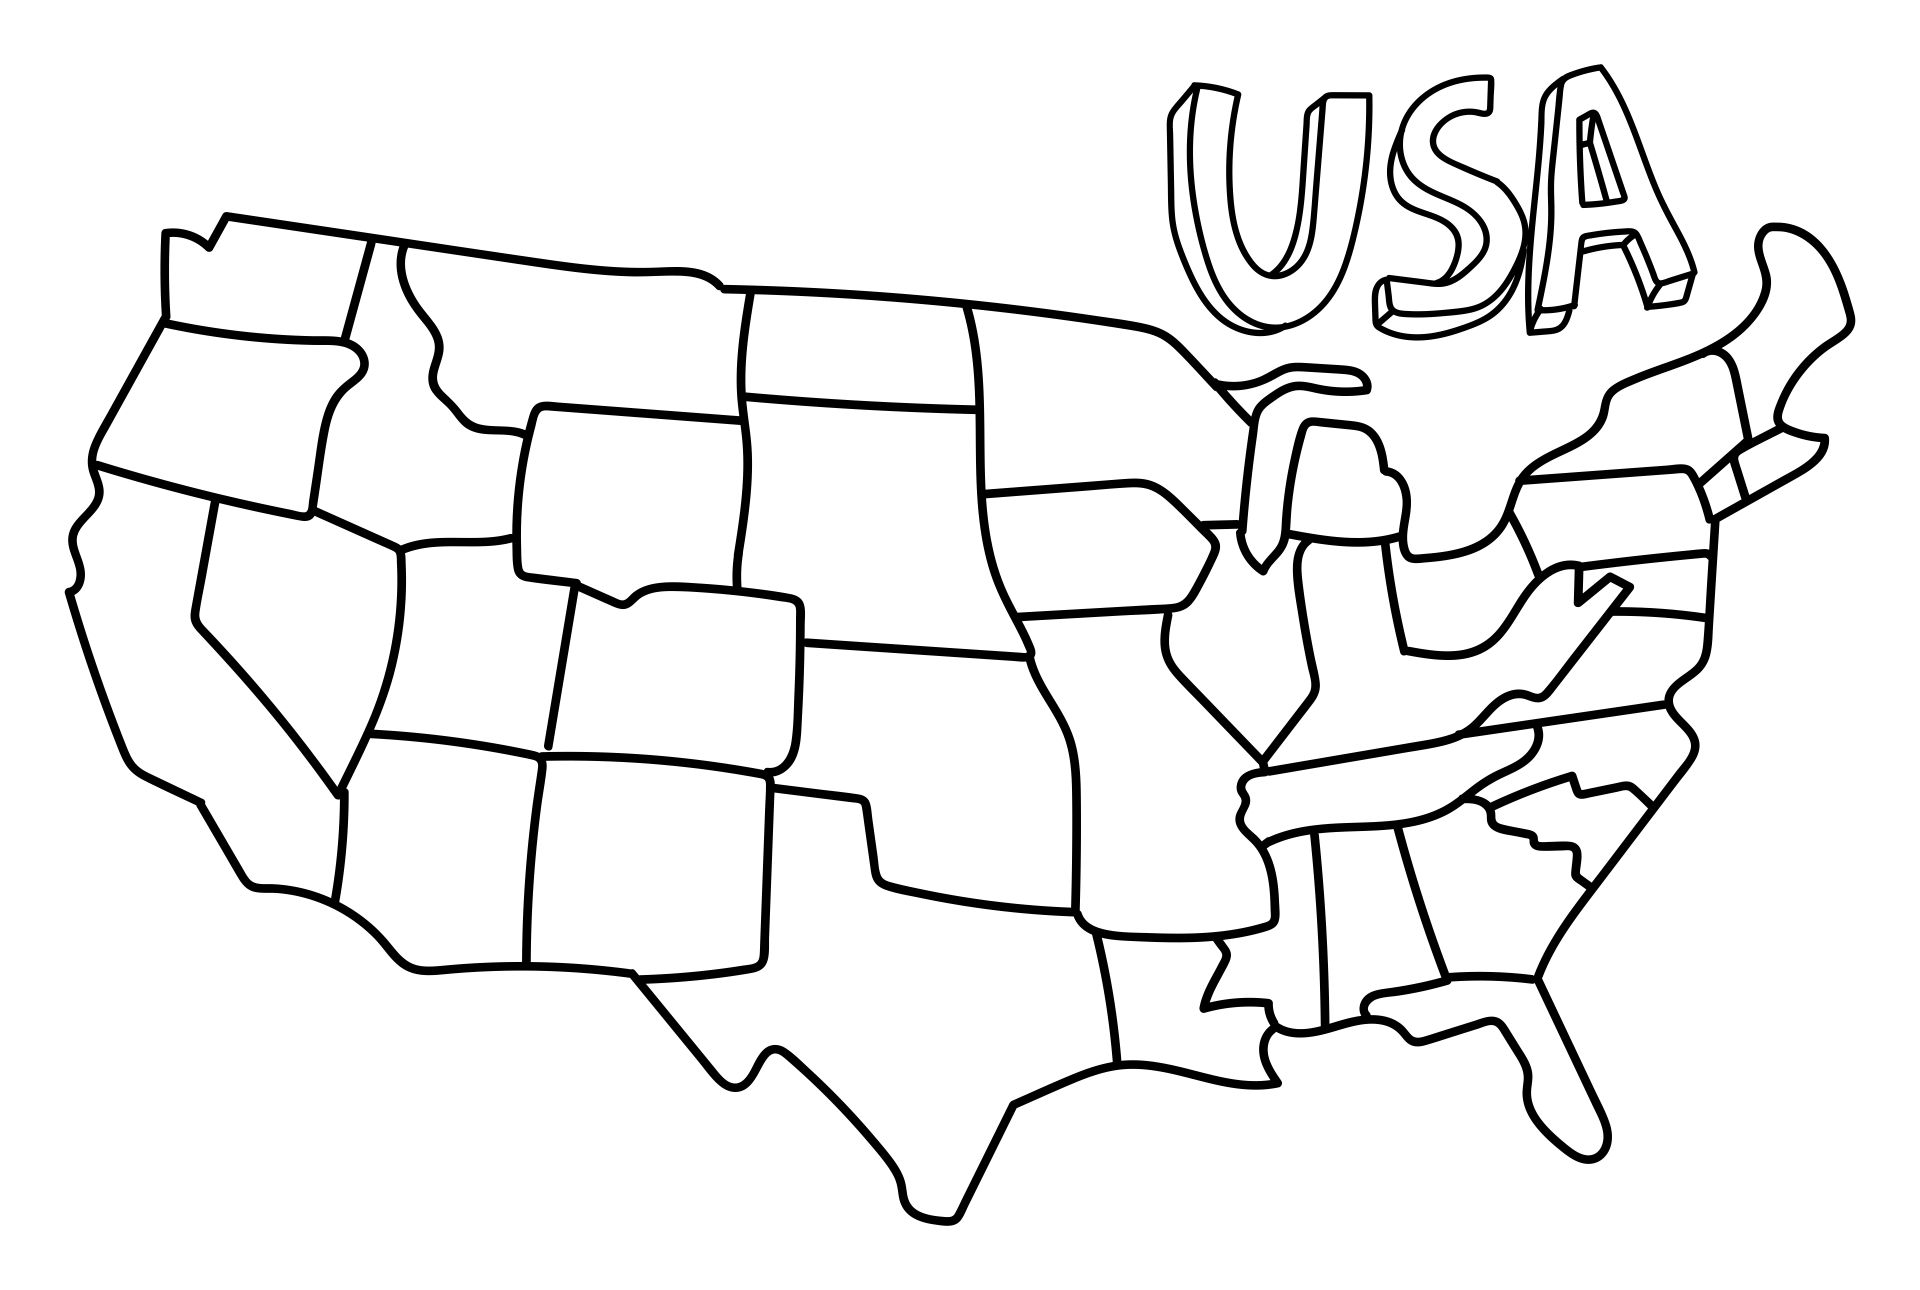 10-best-printable-usa-maps-united-states-colored-pdf-for-free-at-printablee